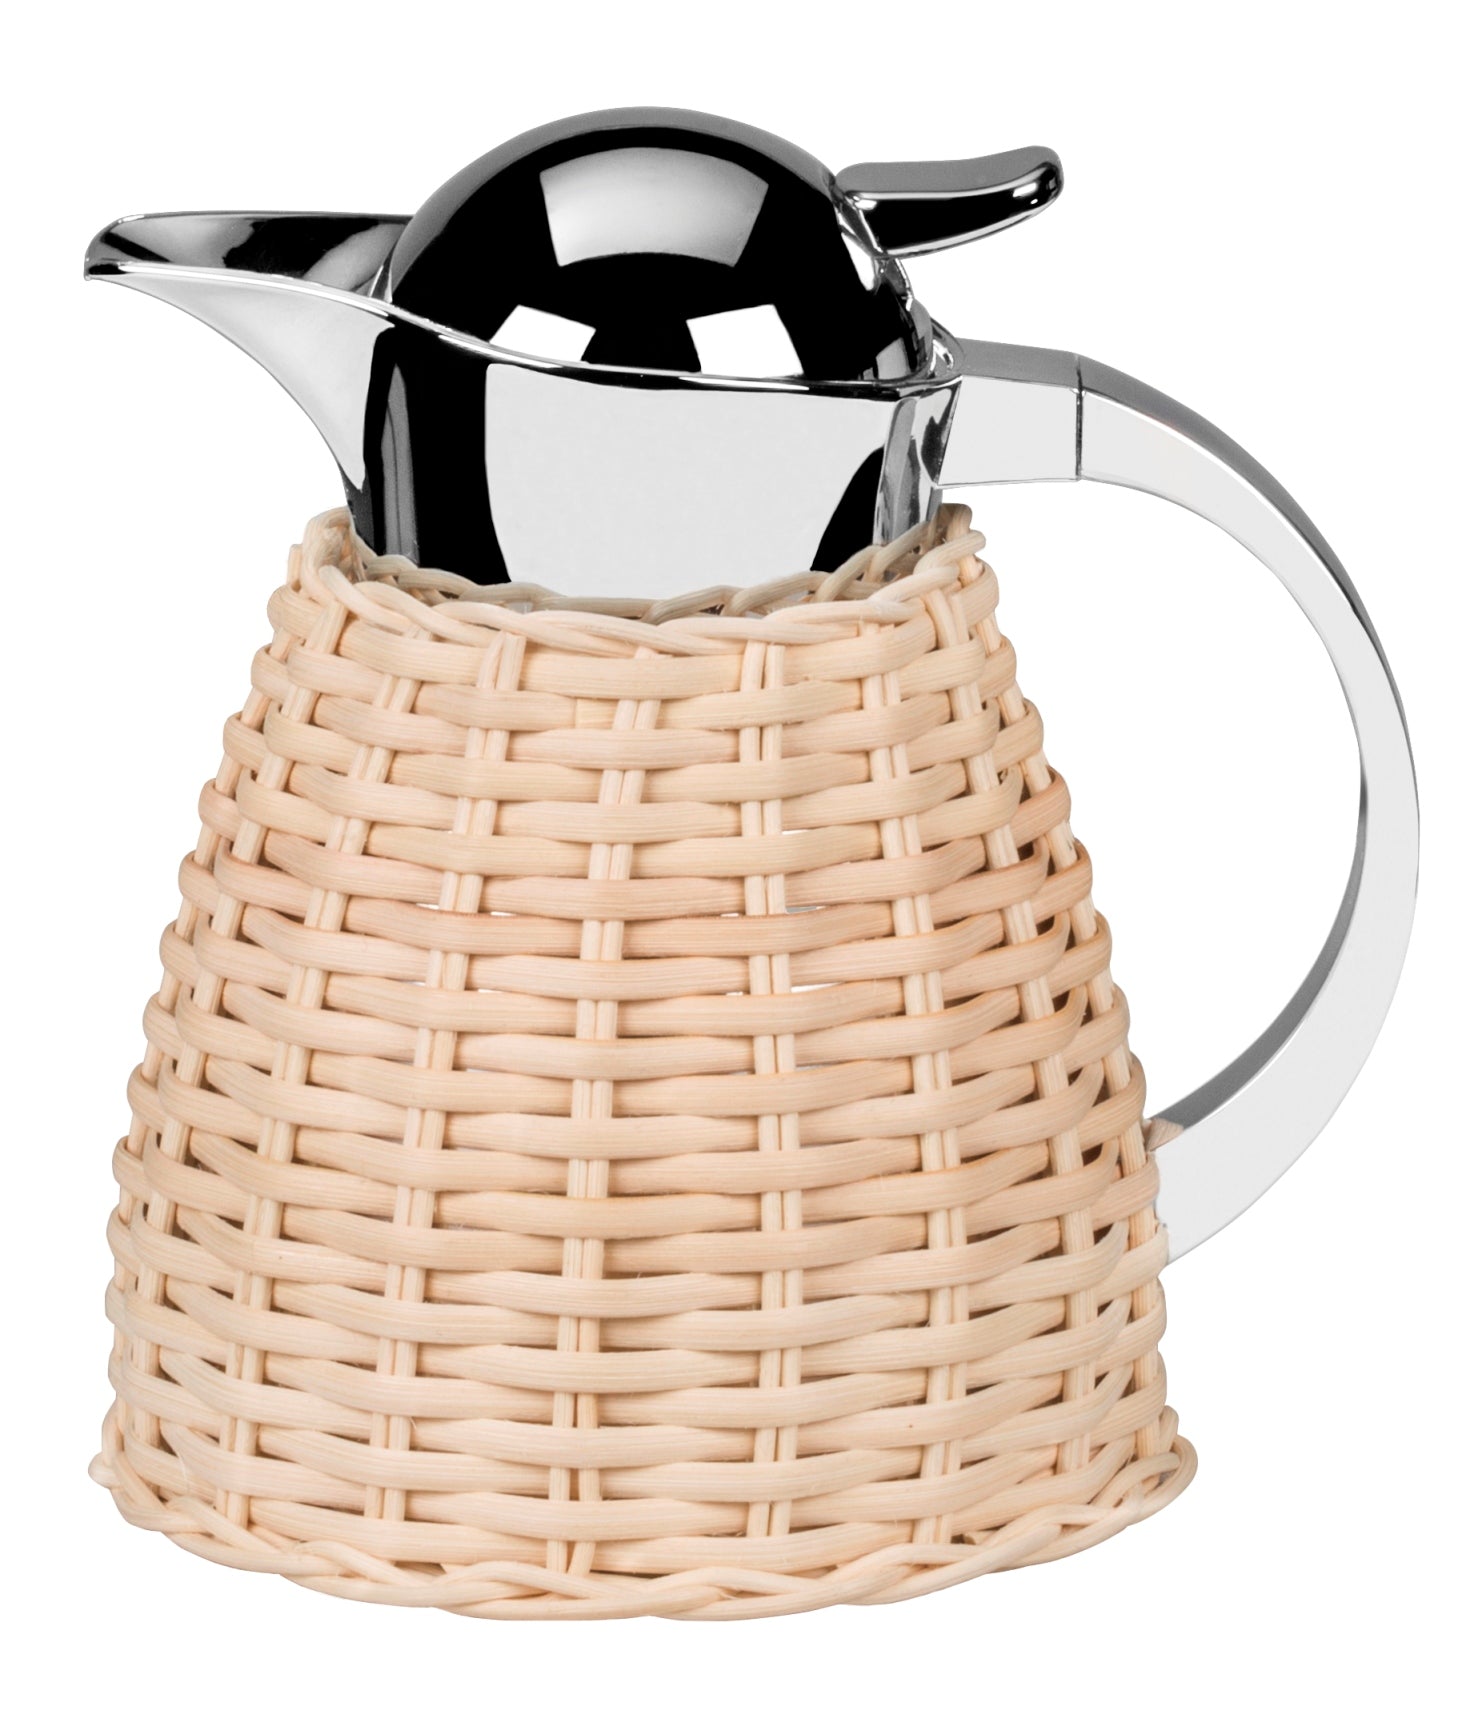 Chantilly Carafe by Pigment France | Partially rattan-covered insulated stainless steel carafe with chrome-plated finish. Two-chamber stainless steel structure maintains liquid’s warm temperatures for up to 12 hours and cold temperatures for up to 24 hours. Precise pouring with specially developed lid for one-hand operation. | Tableware and Drinkware | 2Jour Concierge, your luxury lifestyle shop